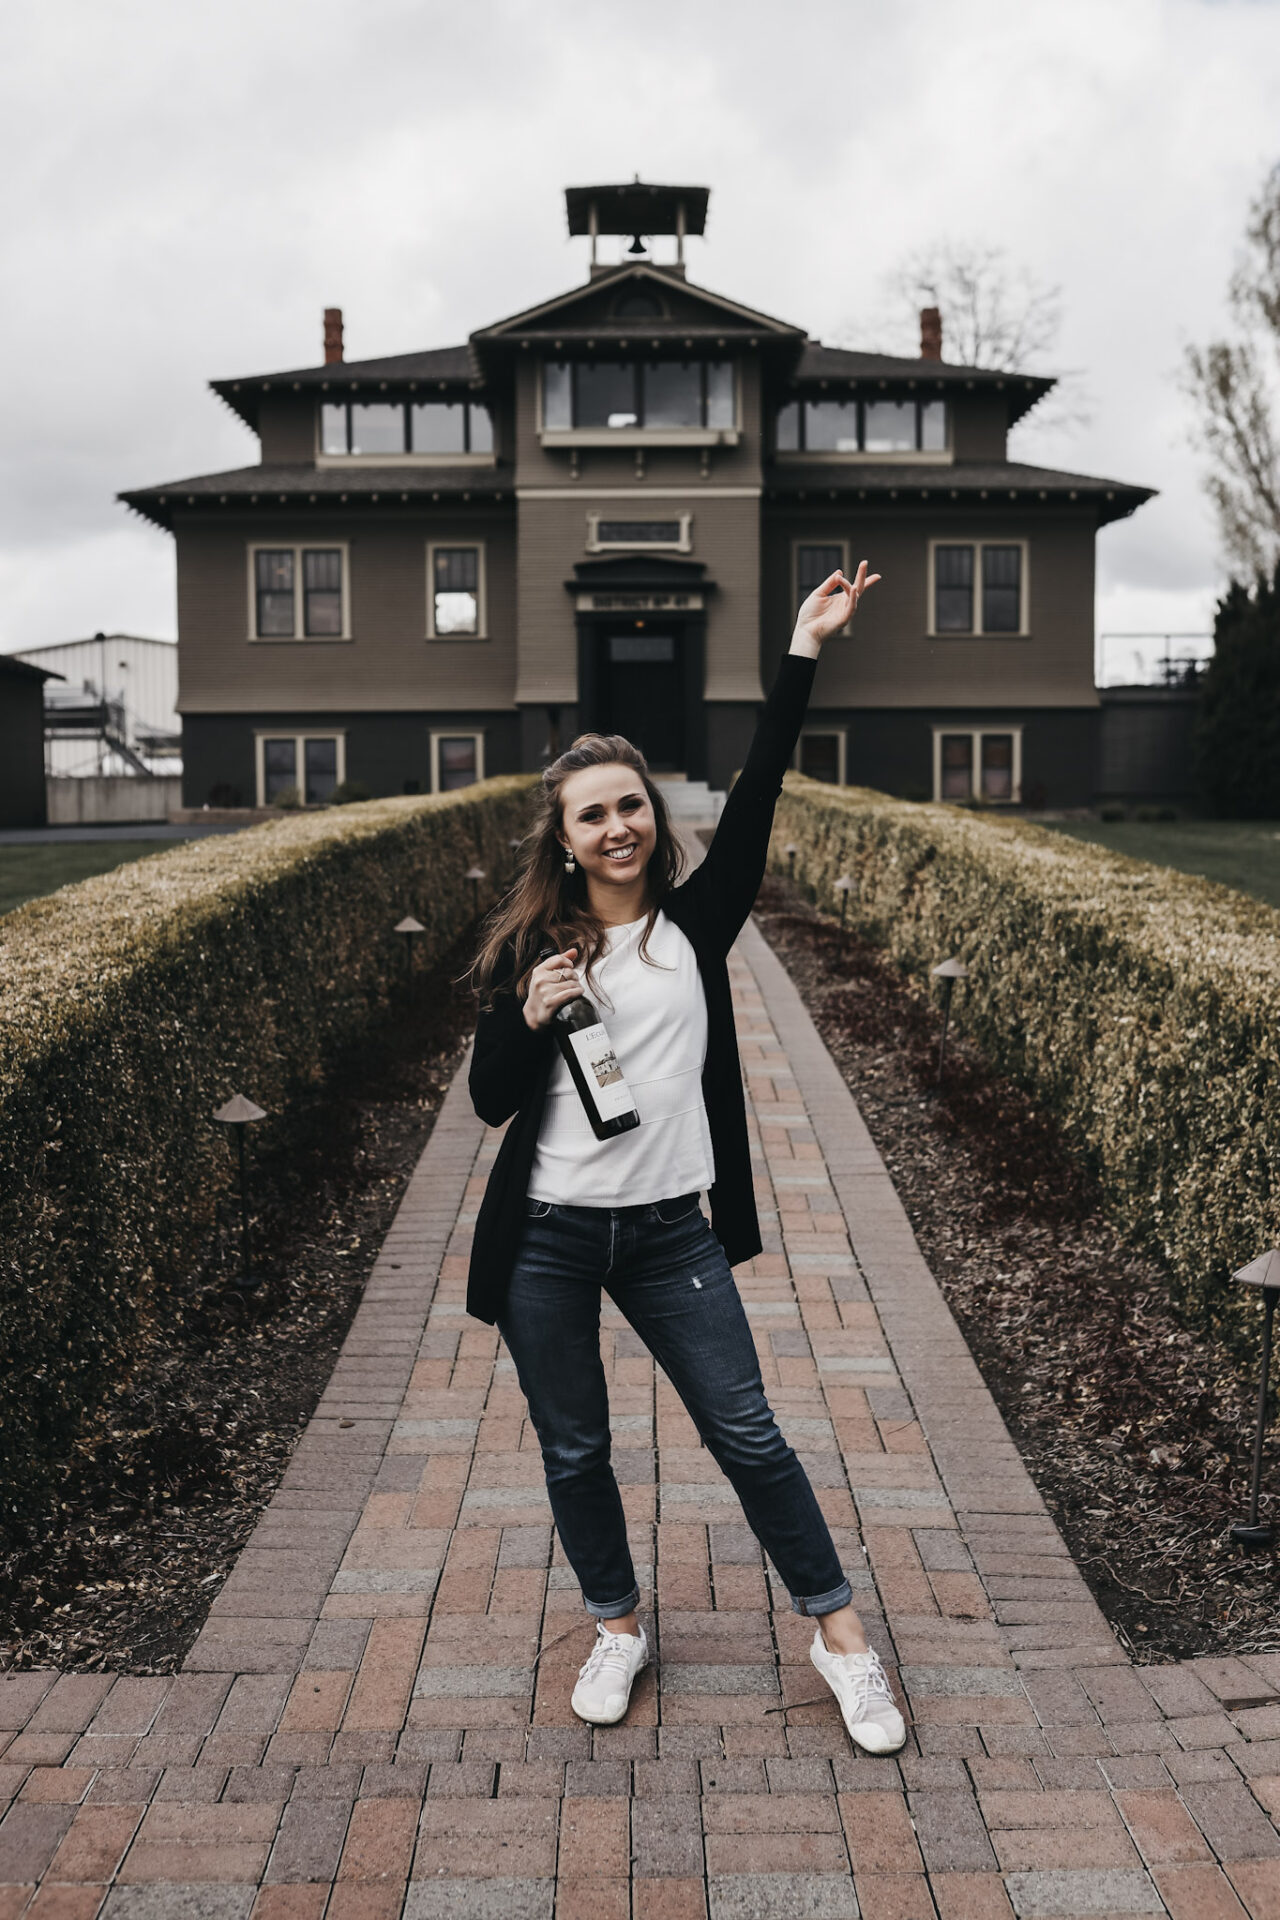 Paige in front of L'Ecole's iconic schoolhouse-turned-winery in Walla Walla